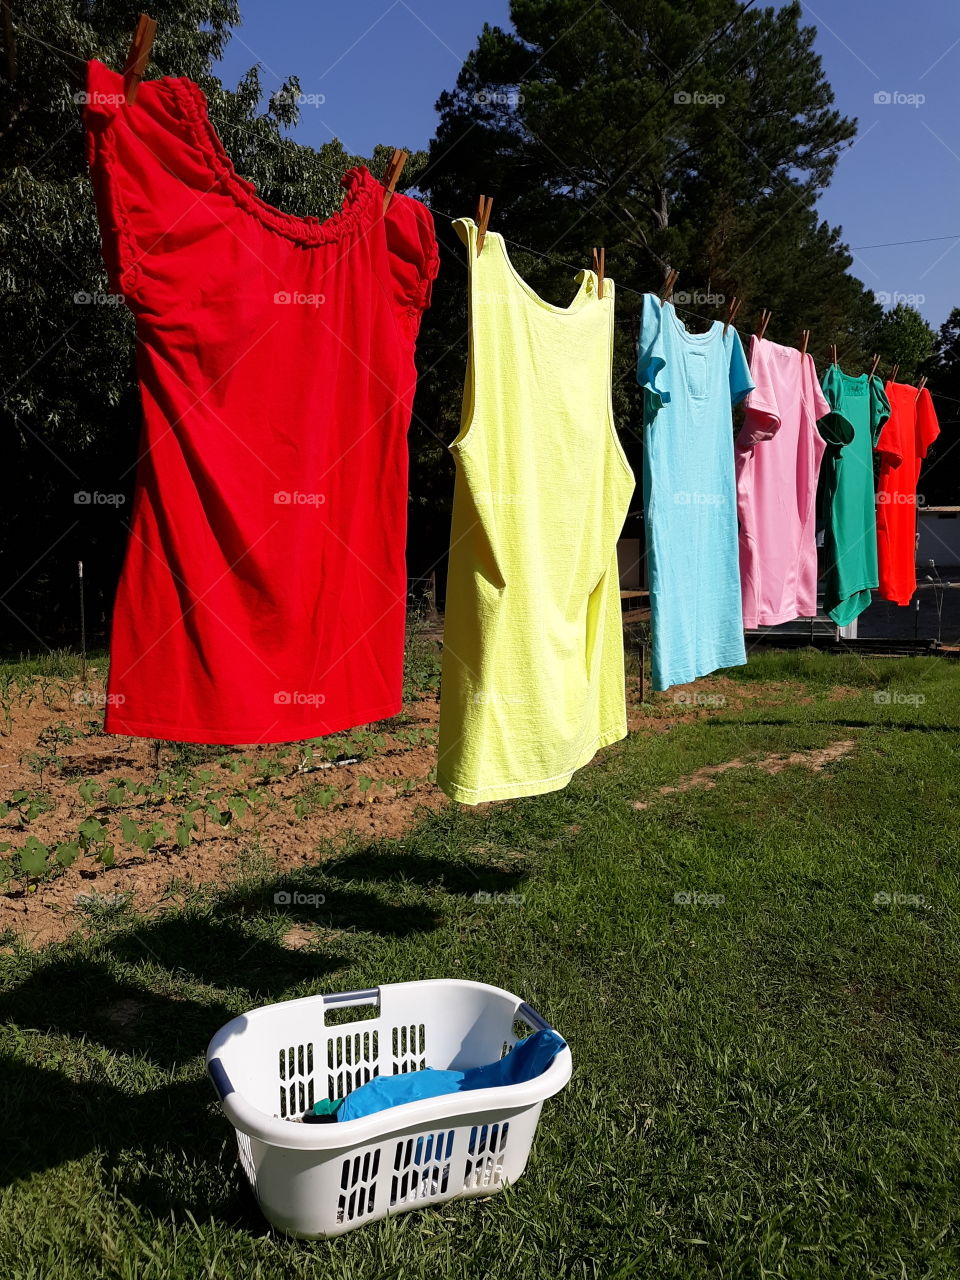 Hanging clothes on the clothesline